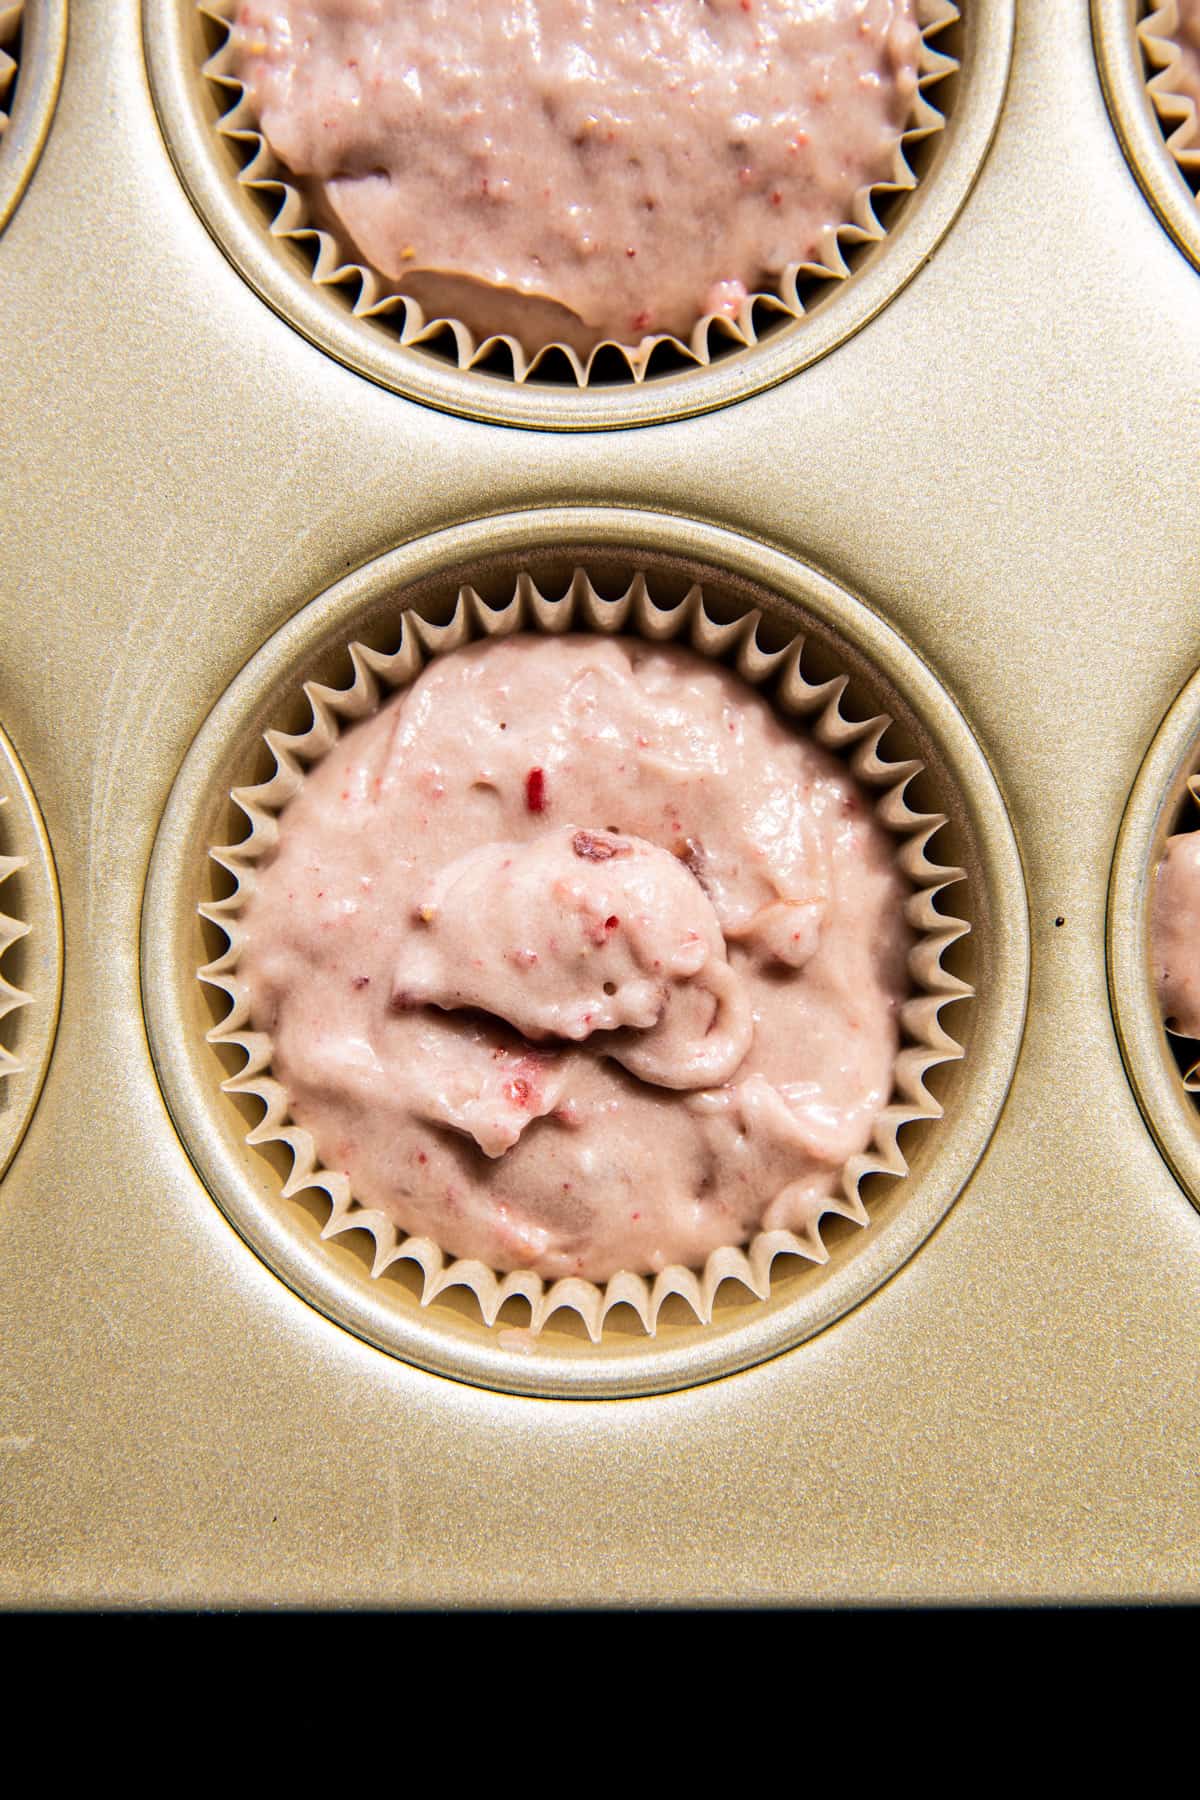 Double Strawberry Cupcake bater before baking 